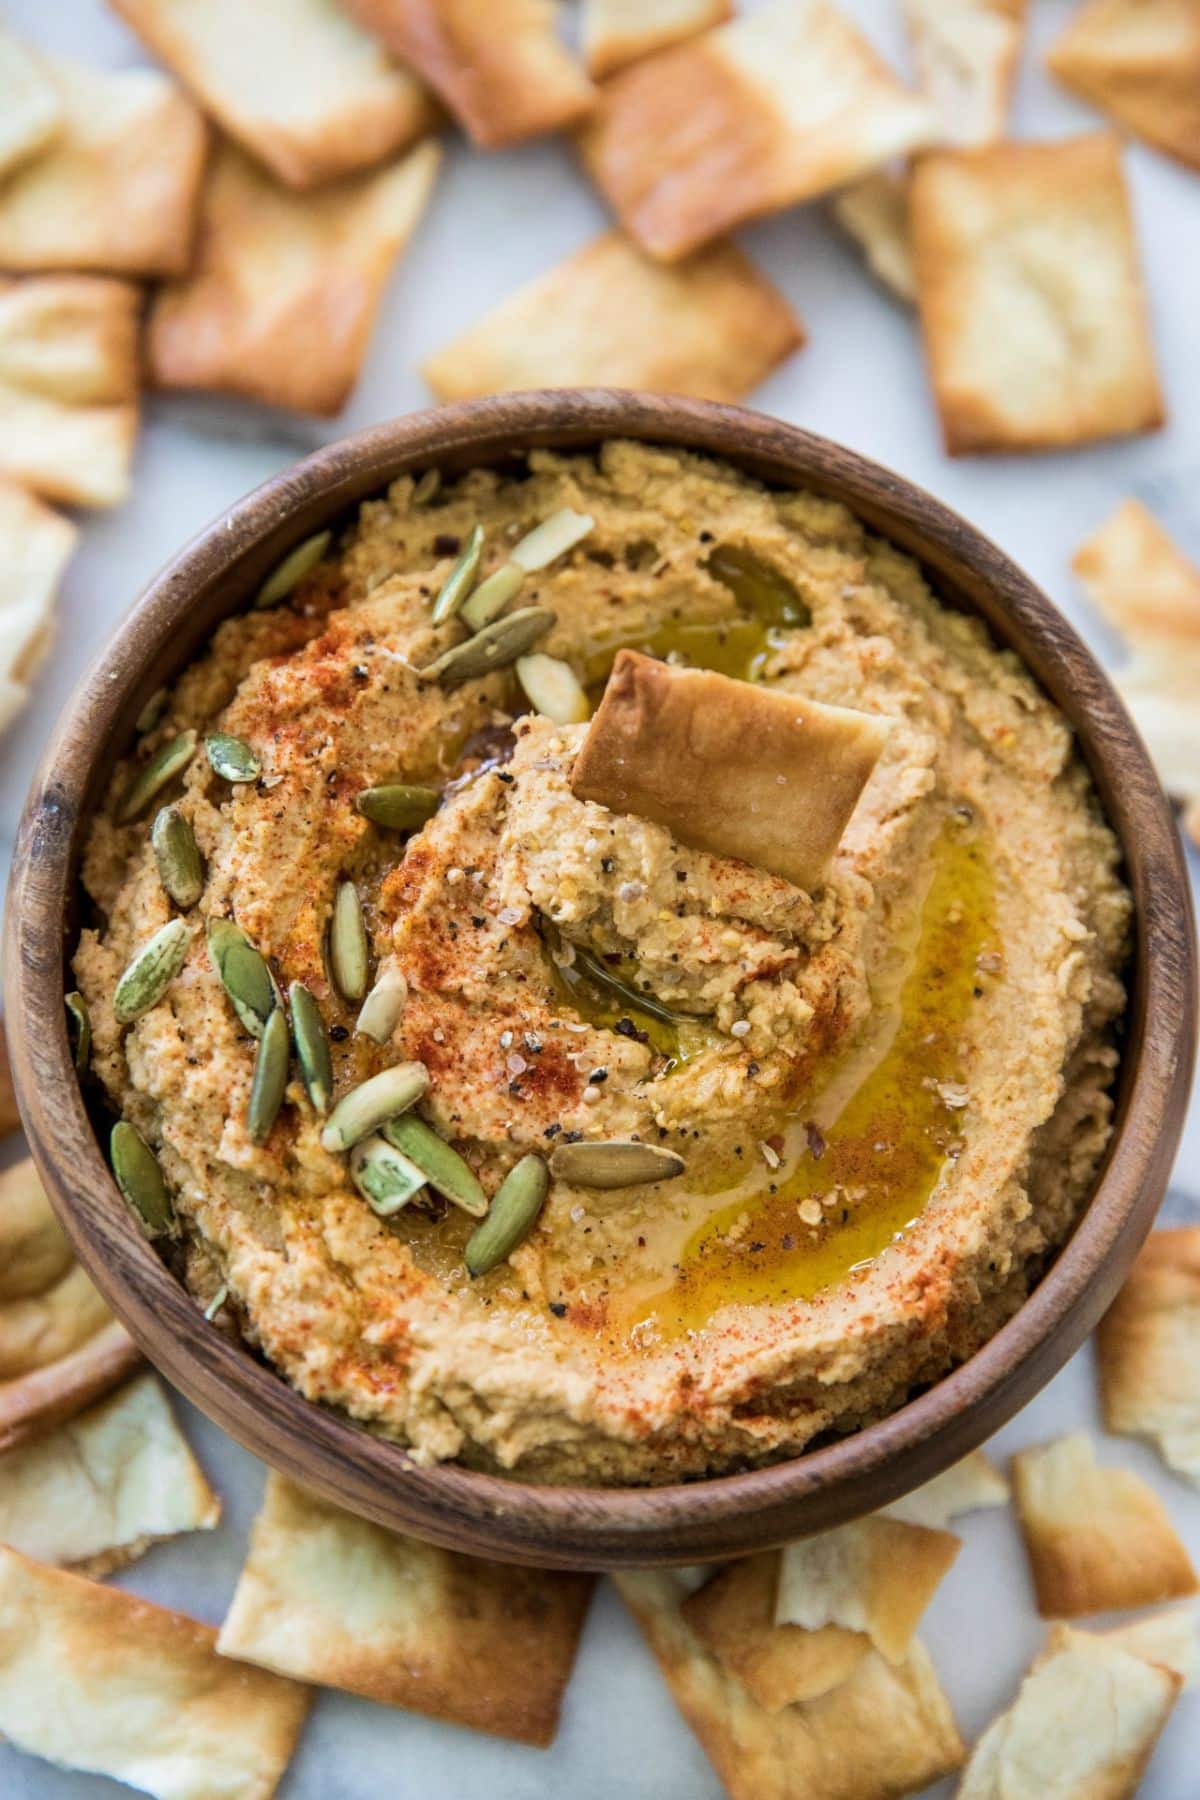 Pumpkin hummus topped with pumpkin seeds, paprika and olive oil.